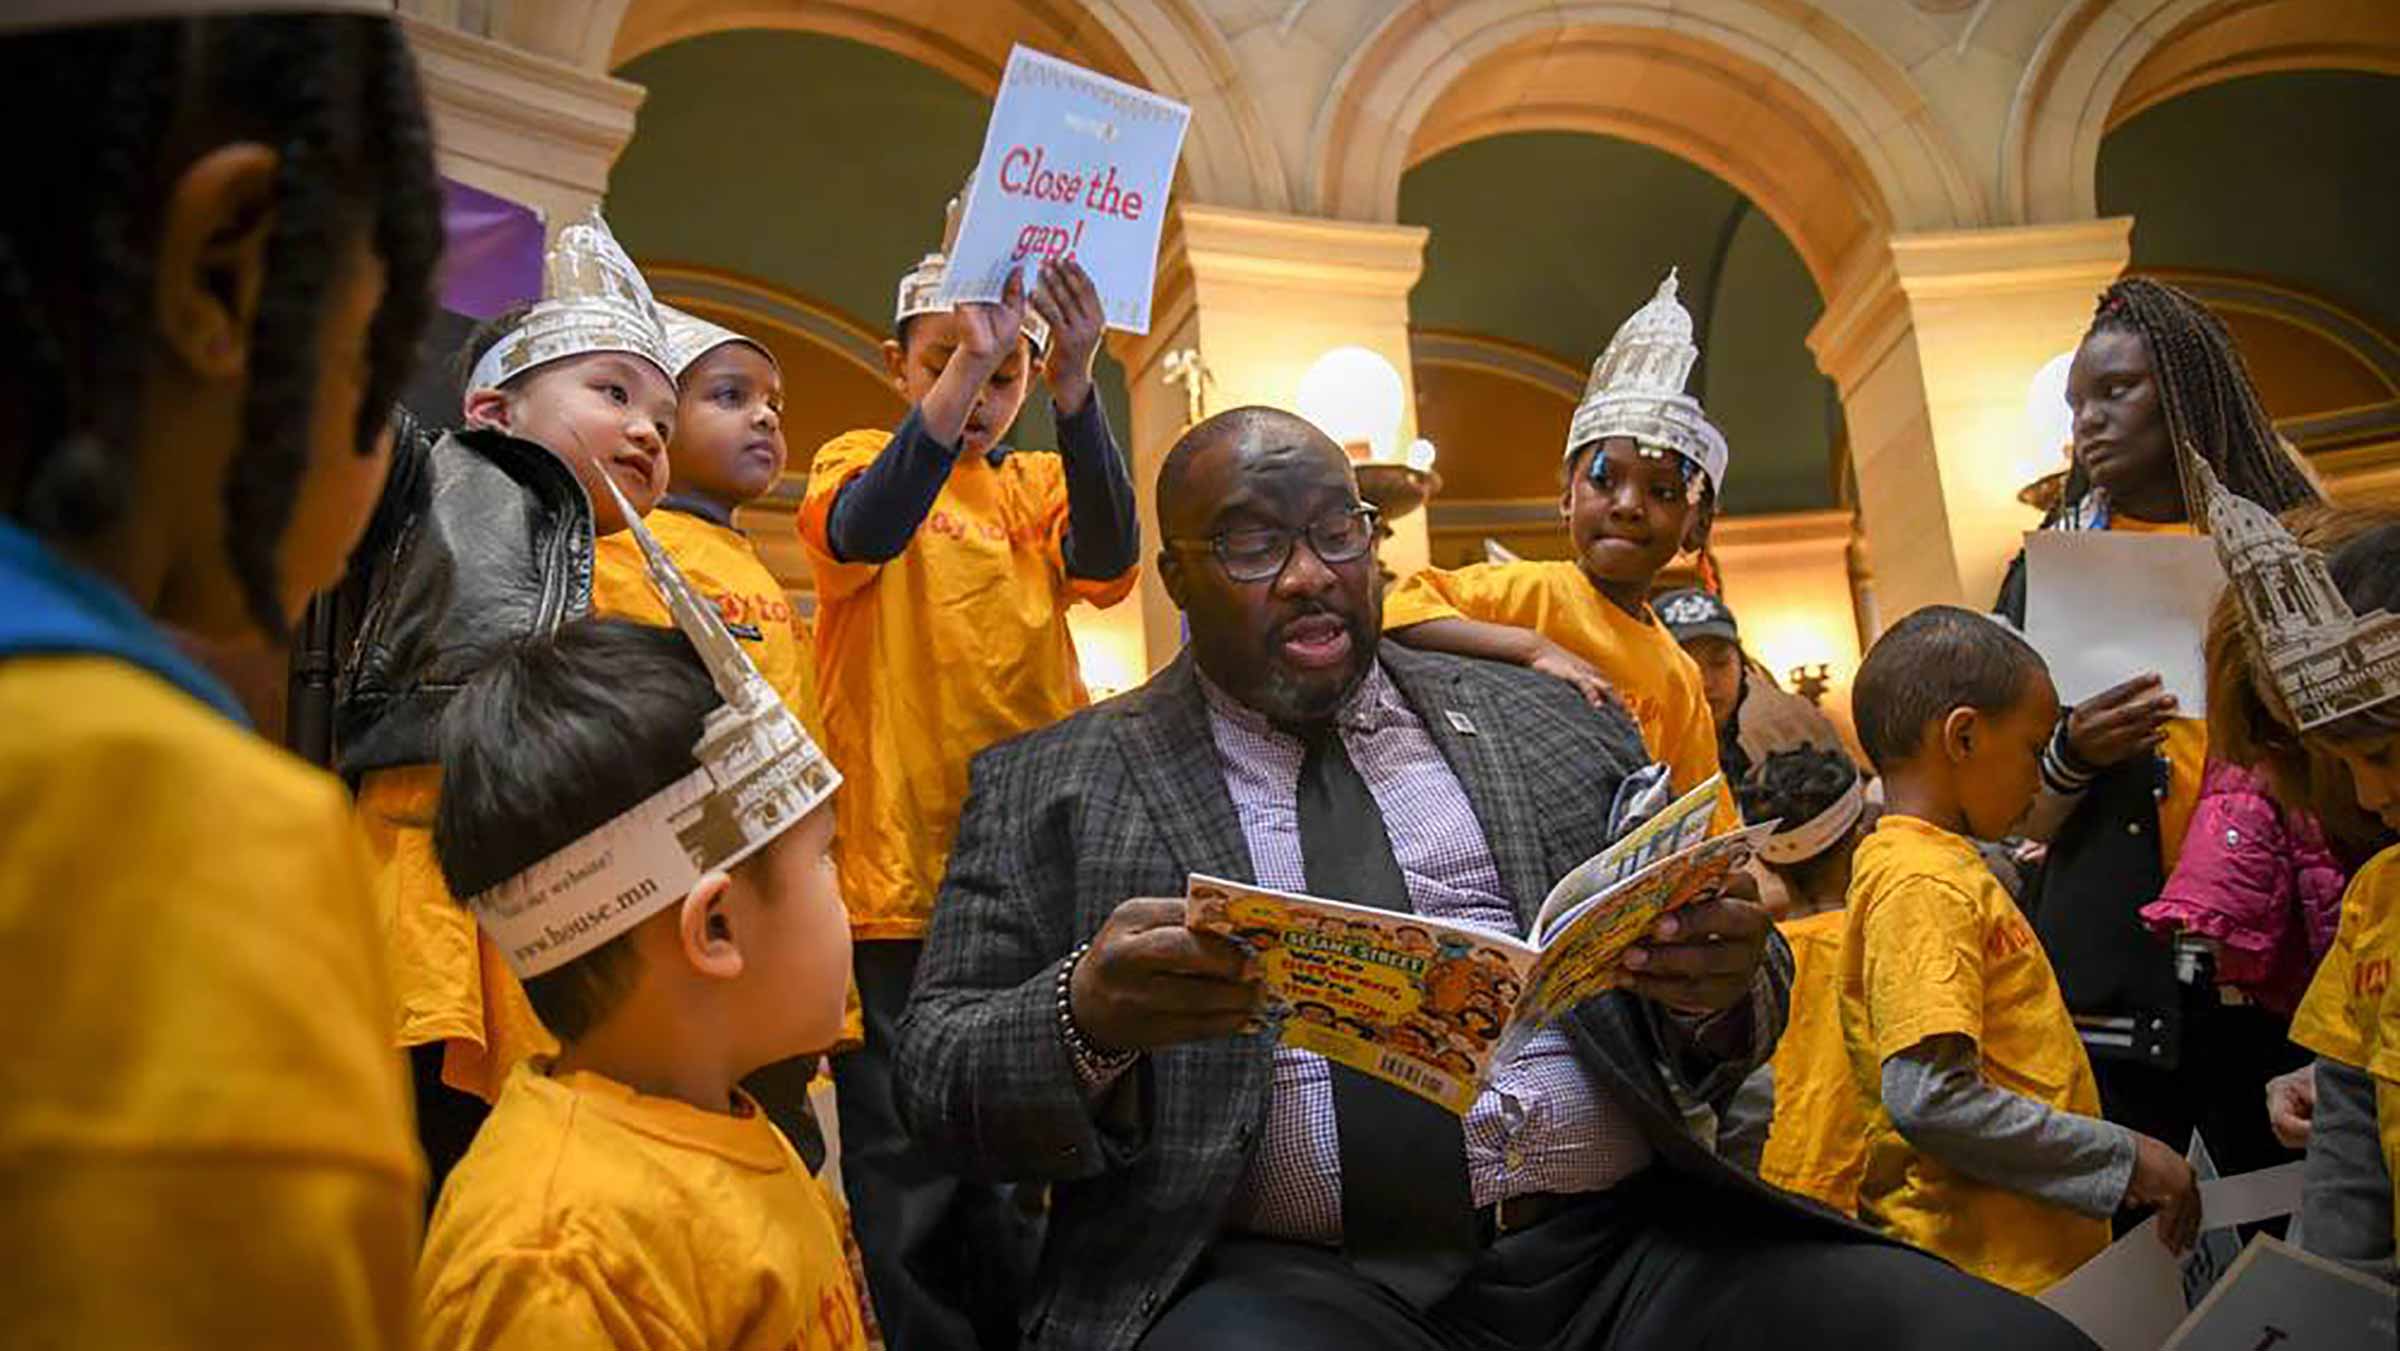 A man reads to a group of children at the Minnesota state capitol building